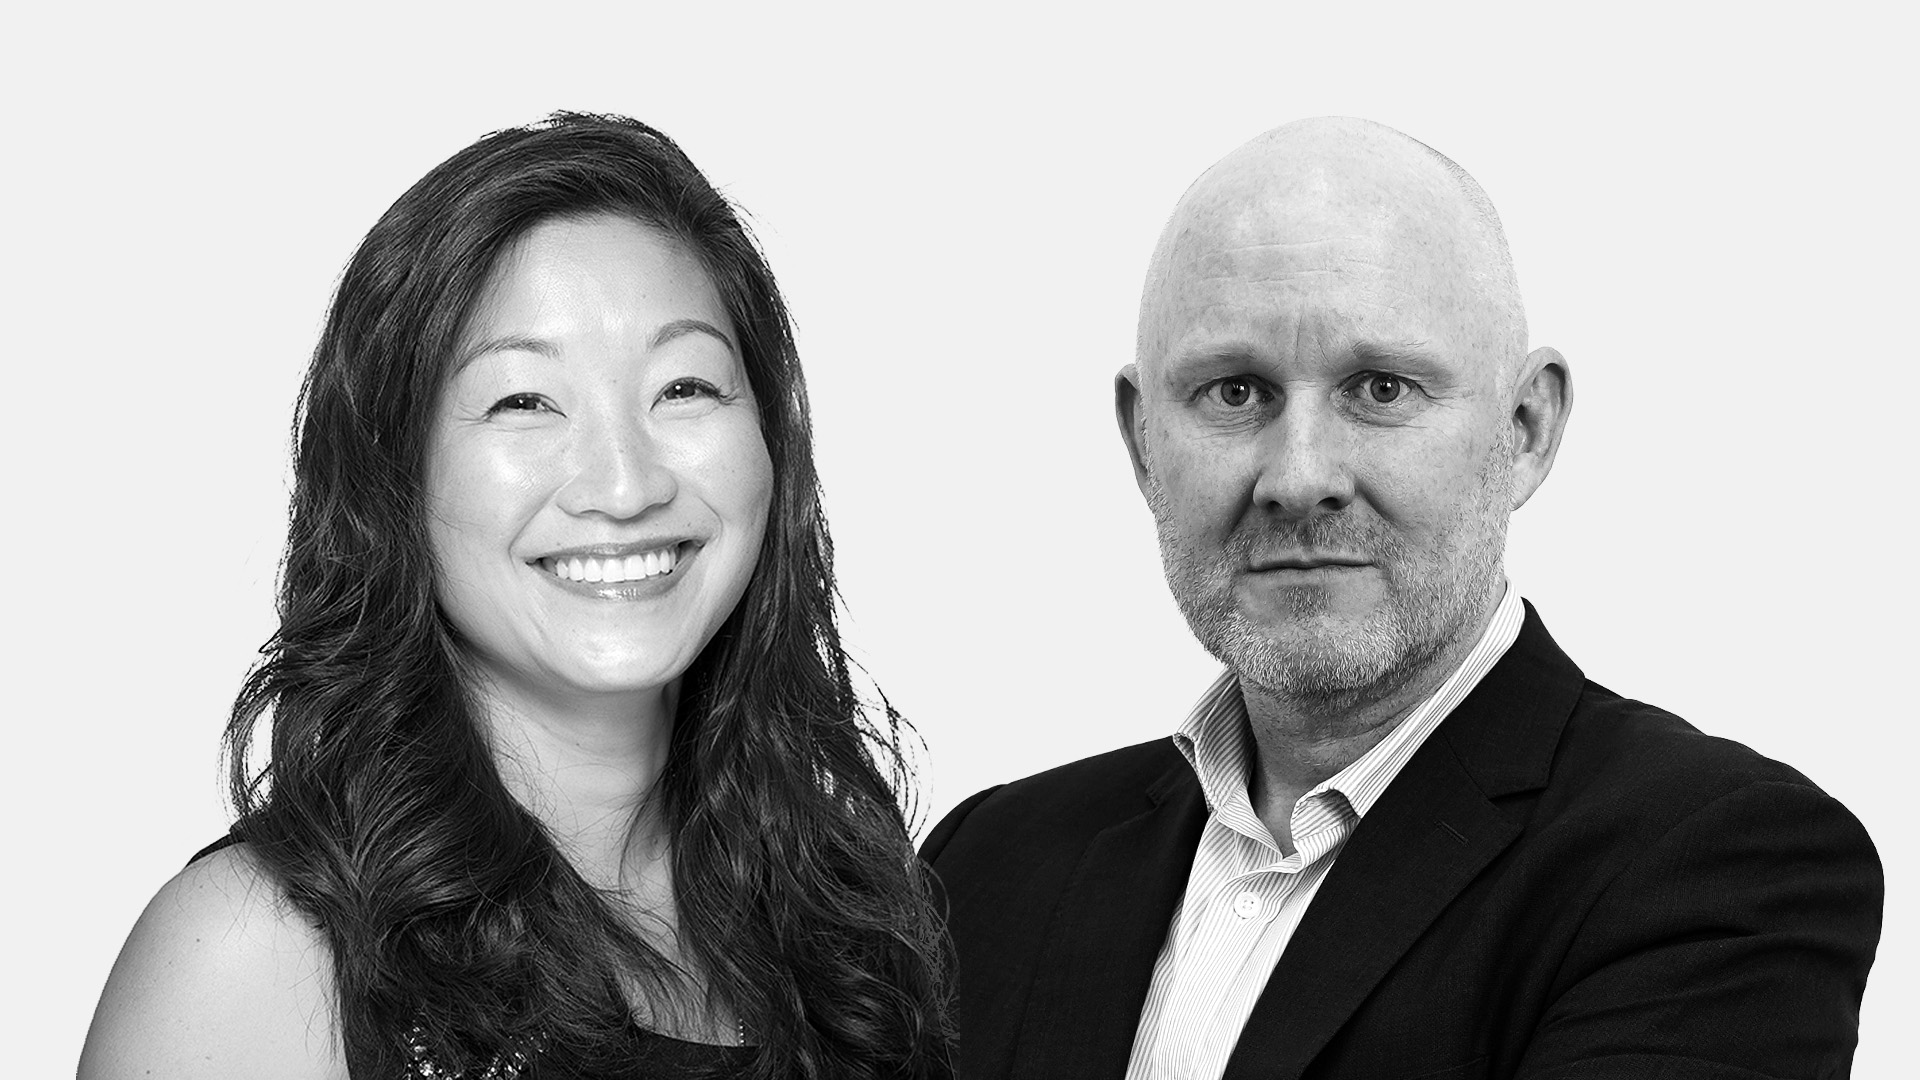 Publicis Media appoints two senior client leads to lead Adobe account across Asia-Pacific